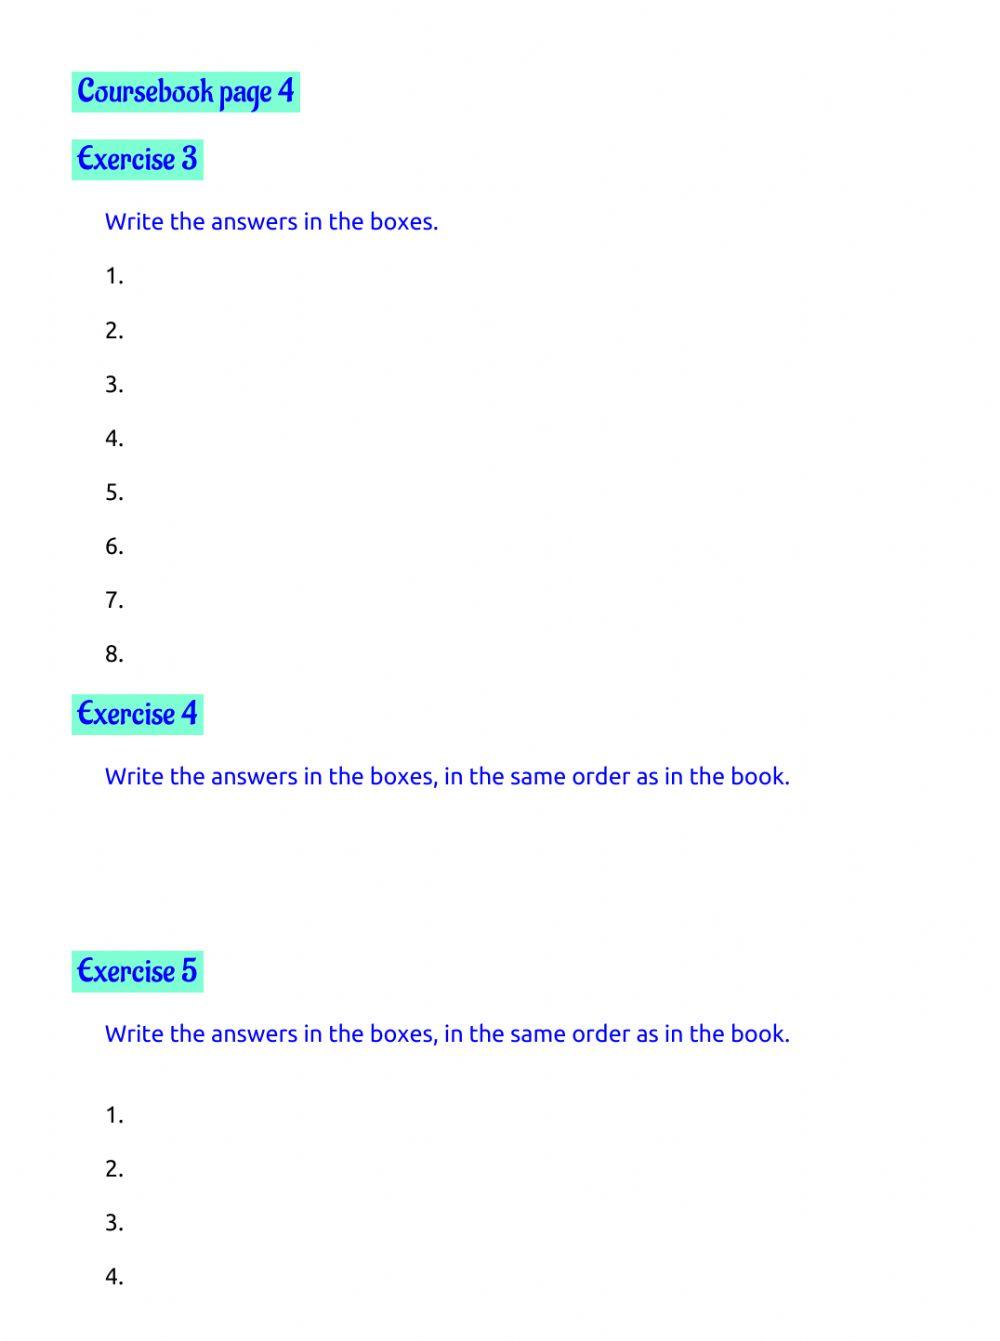 Page 4 exercises 3, 4, 5